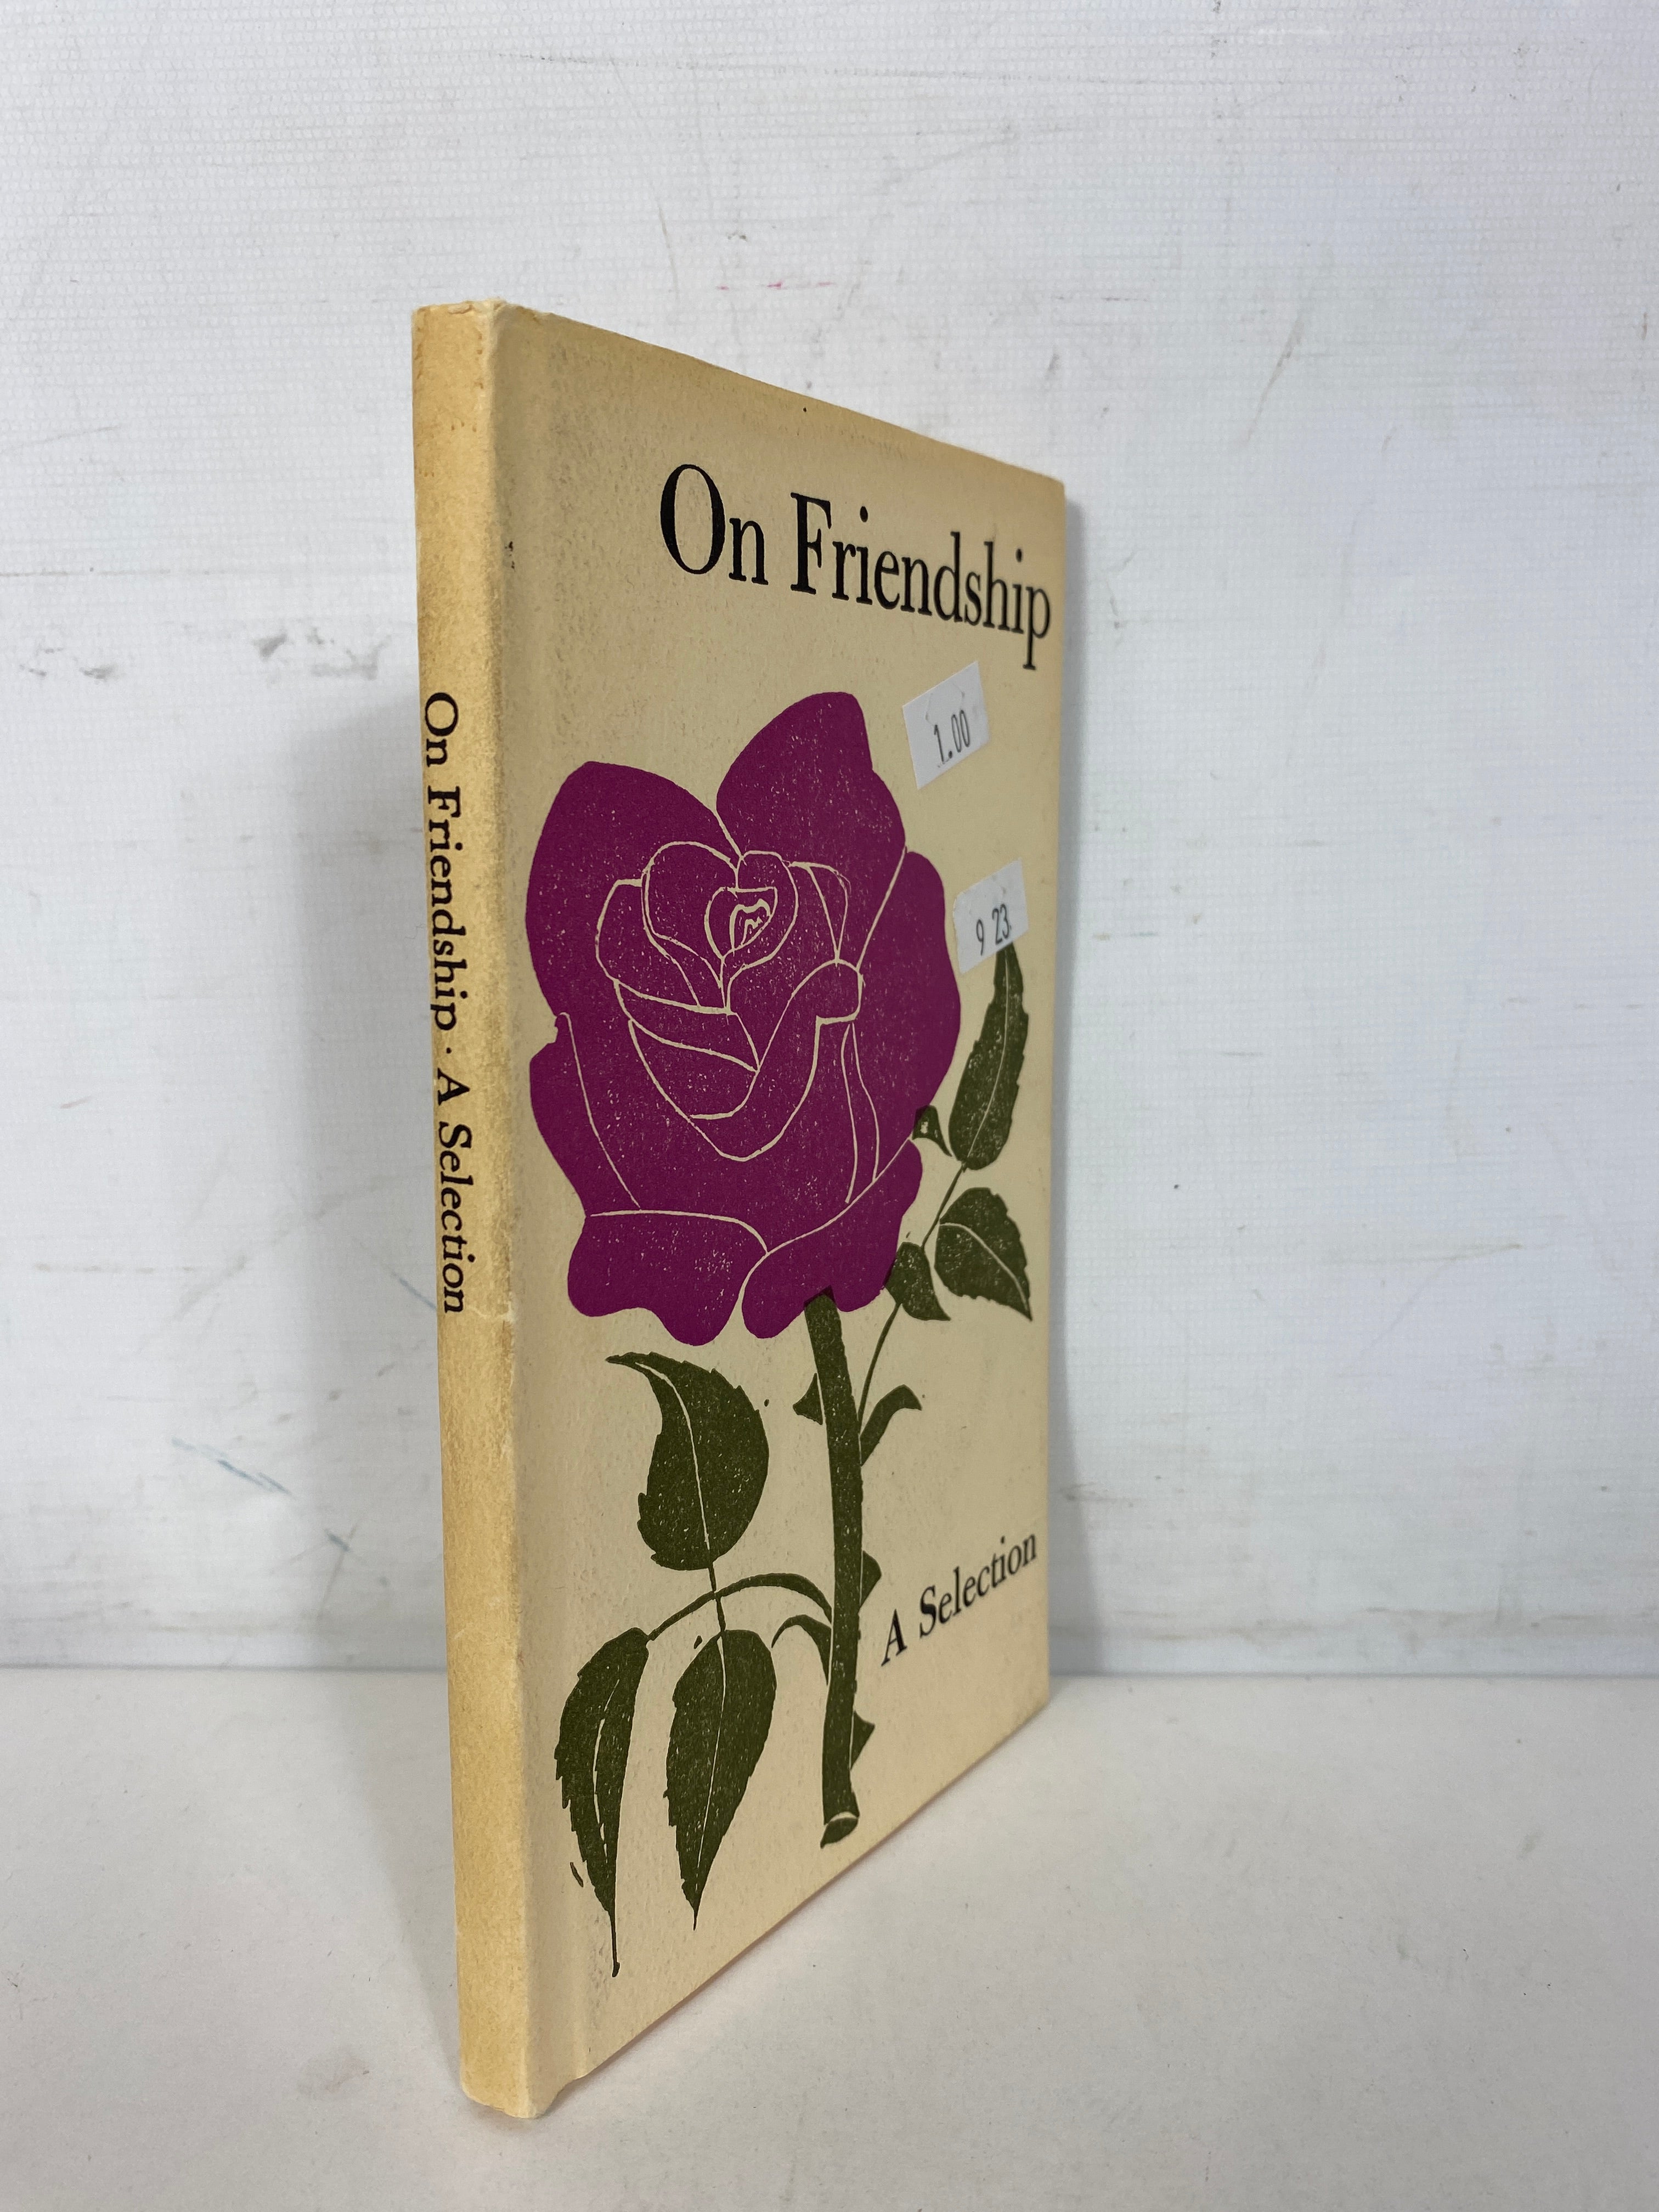 On Friendship A Selection by Louise Bachelder and Eric Carle 1966 HC DJ